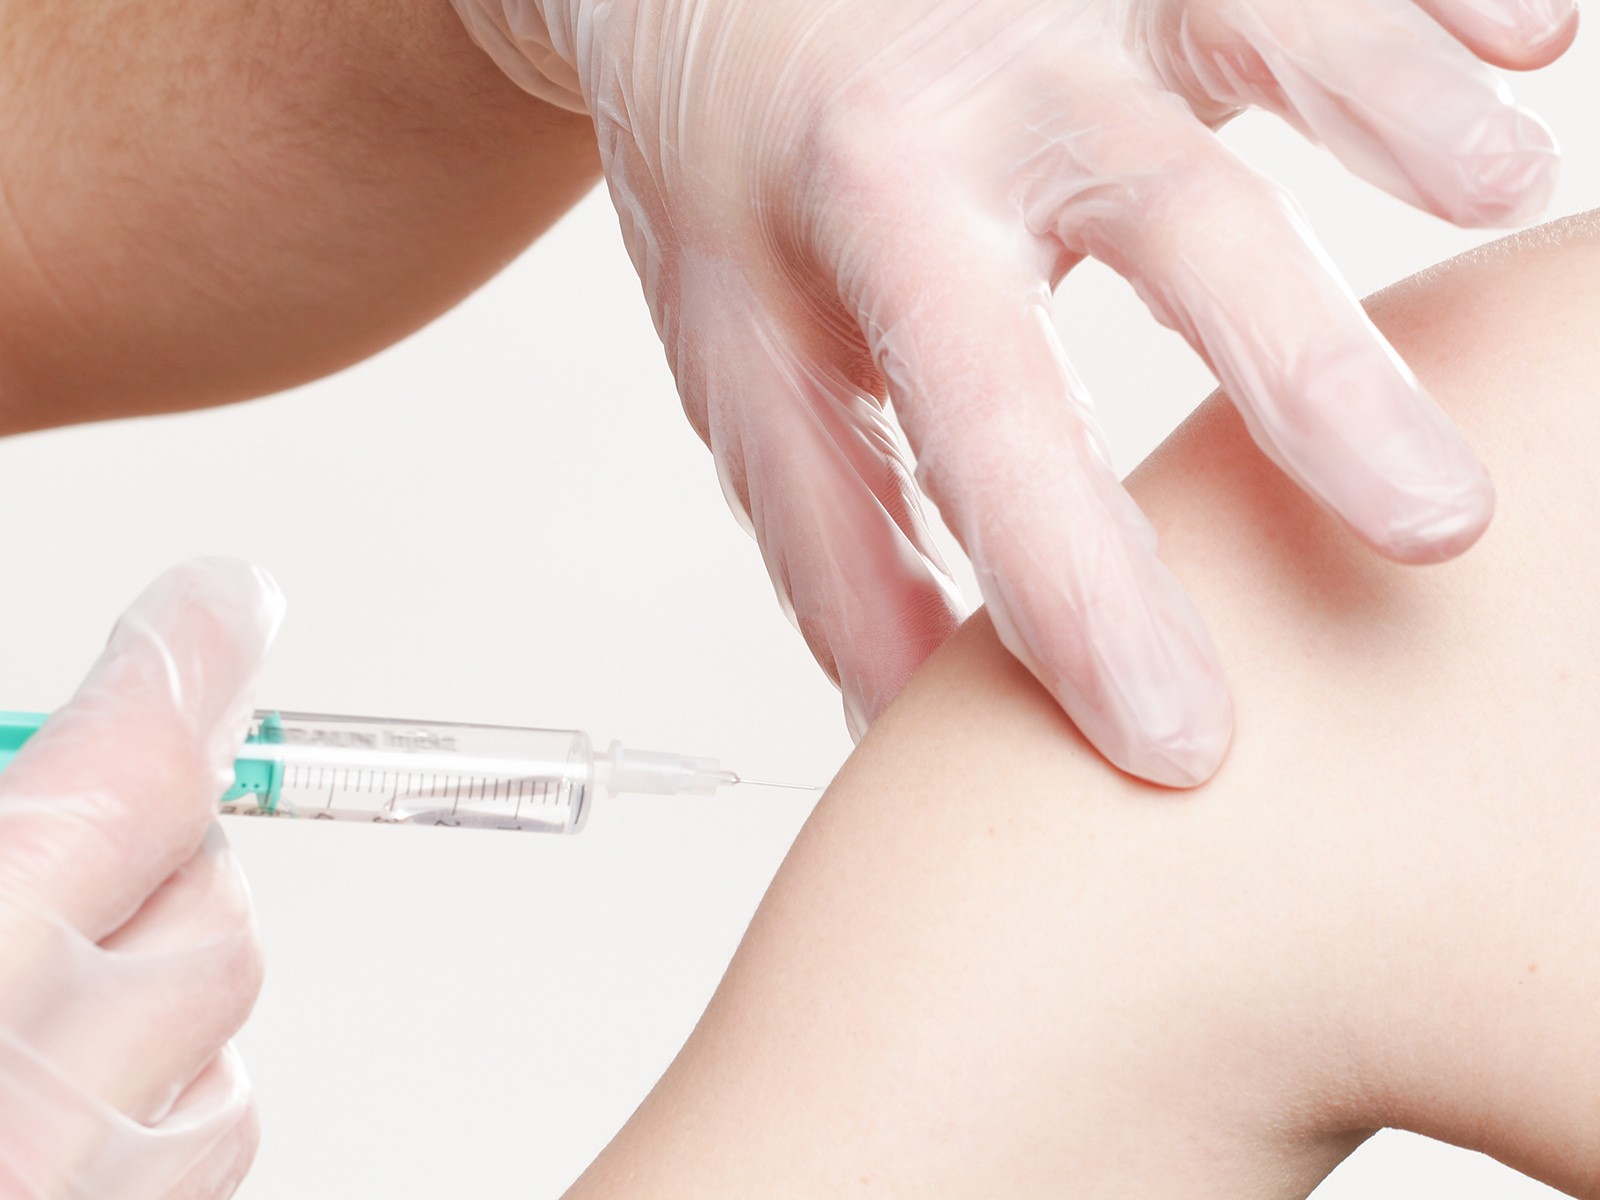 Who should get the HPV vaccine?